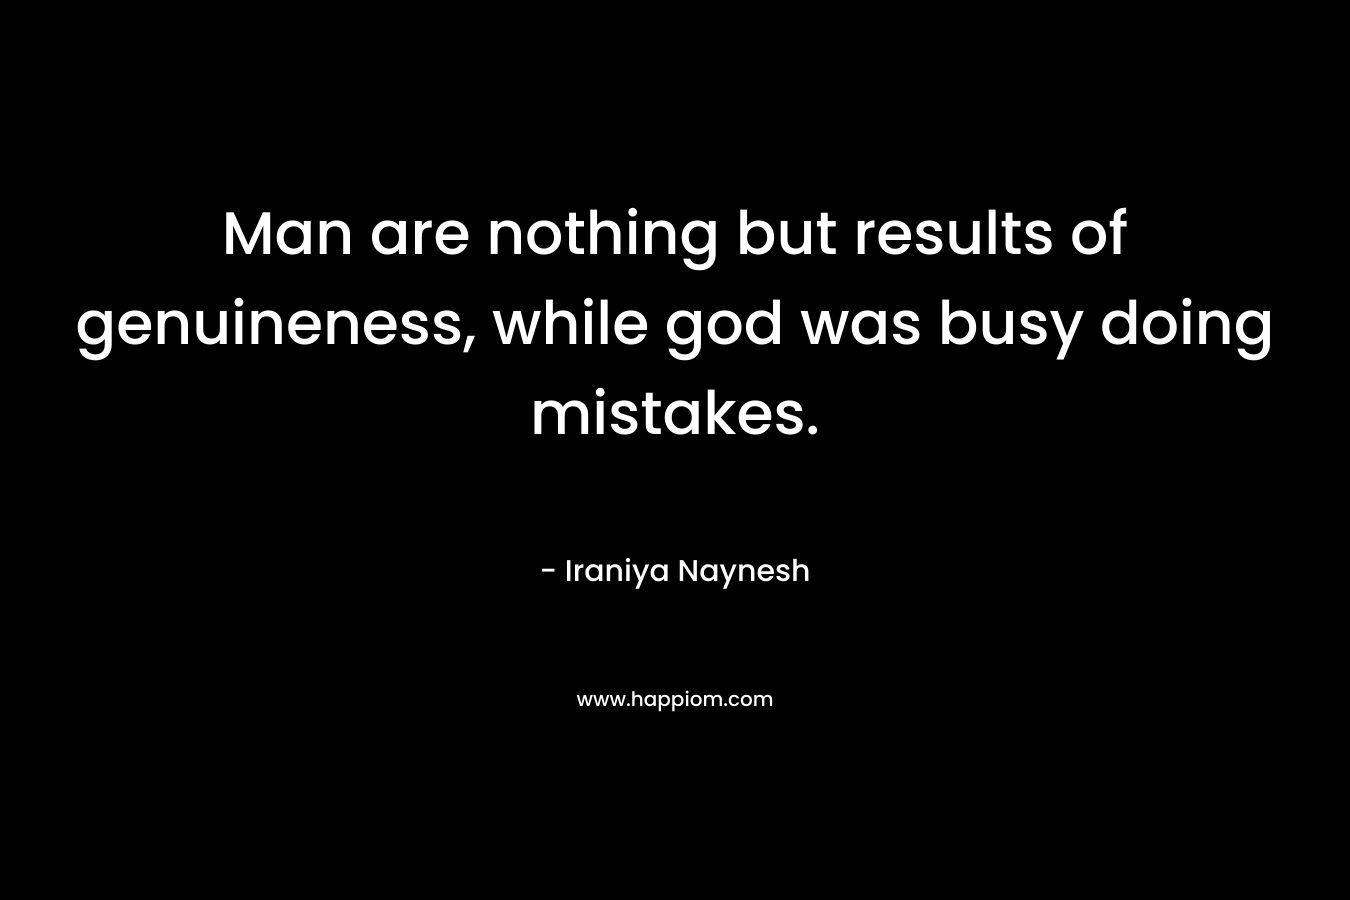 Man are nothing but results of genuineness, while god was busy doing mistakes. – Iraniya Naynesh